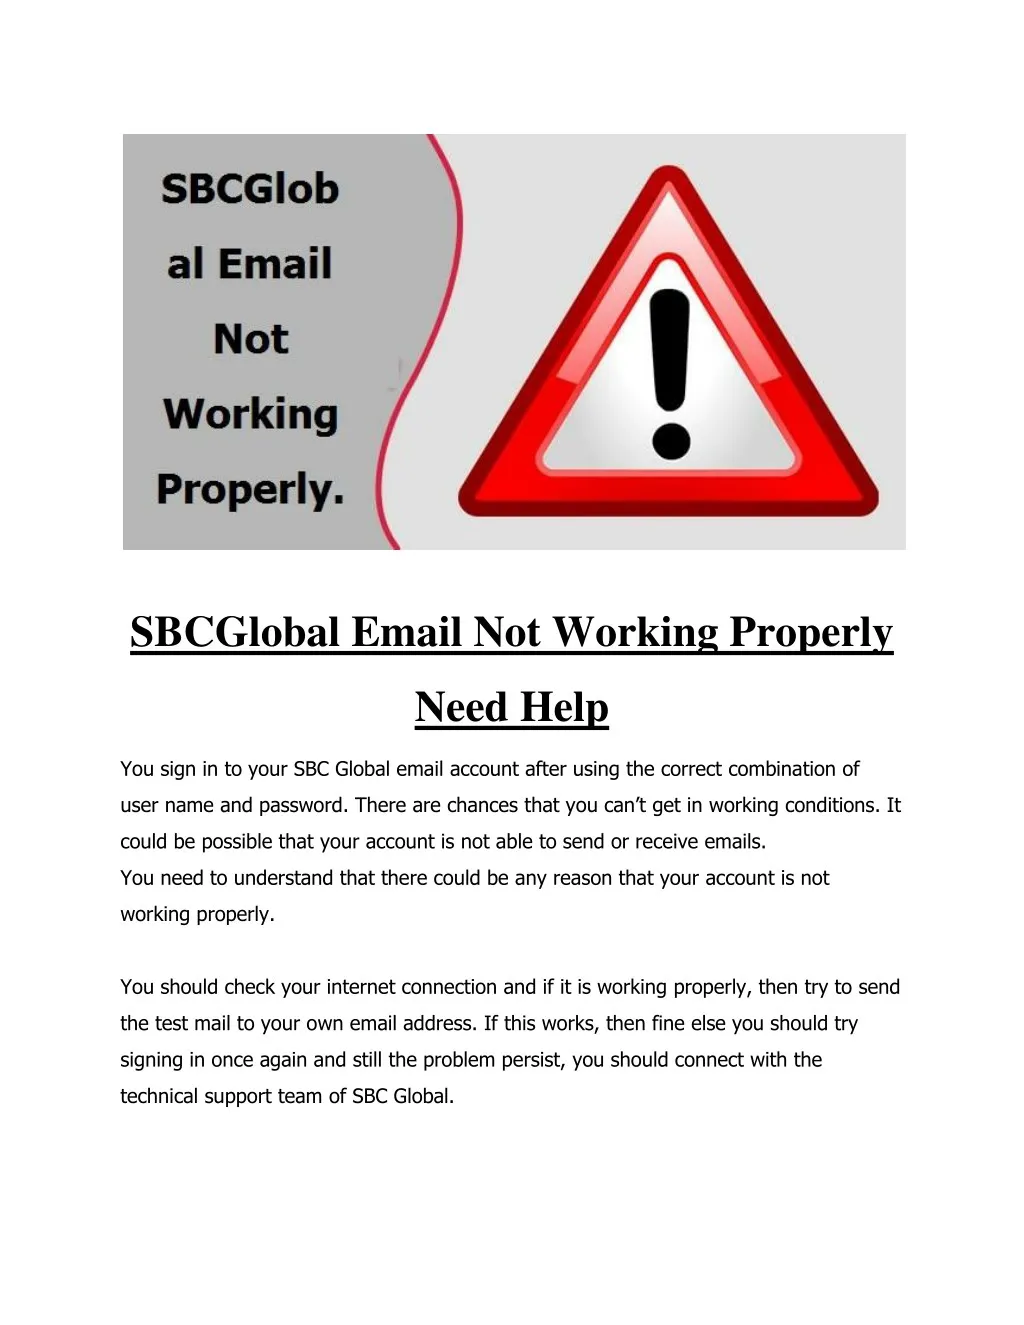 sbcglobal email not working properly